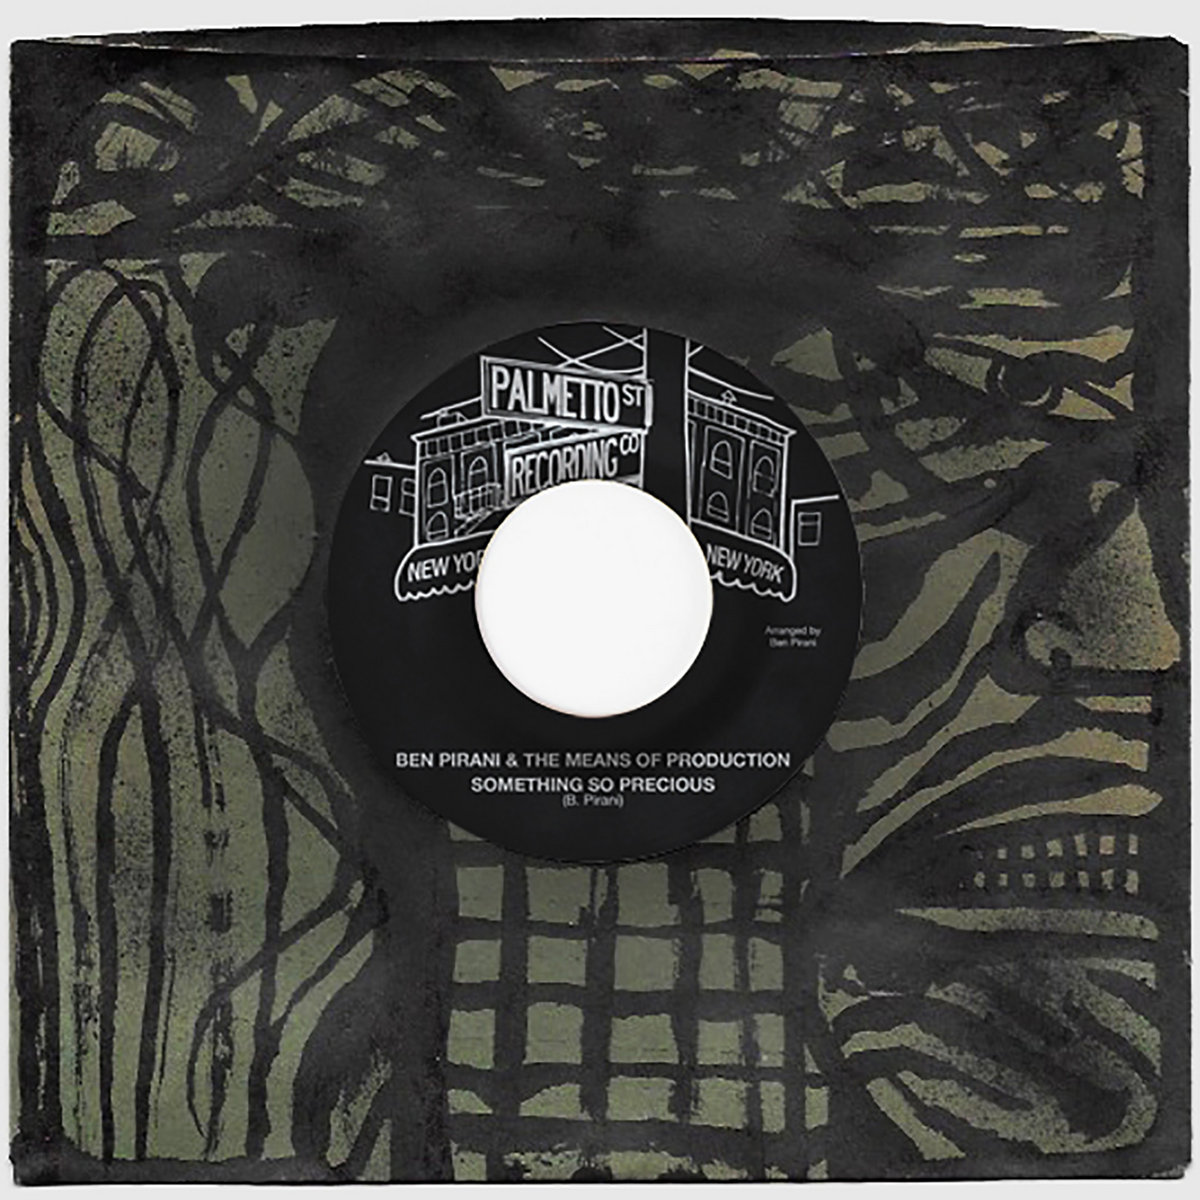 Ben Pirani & The Means of Production - I Know It Hurts / Something So Precious : 7inch